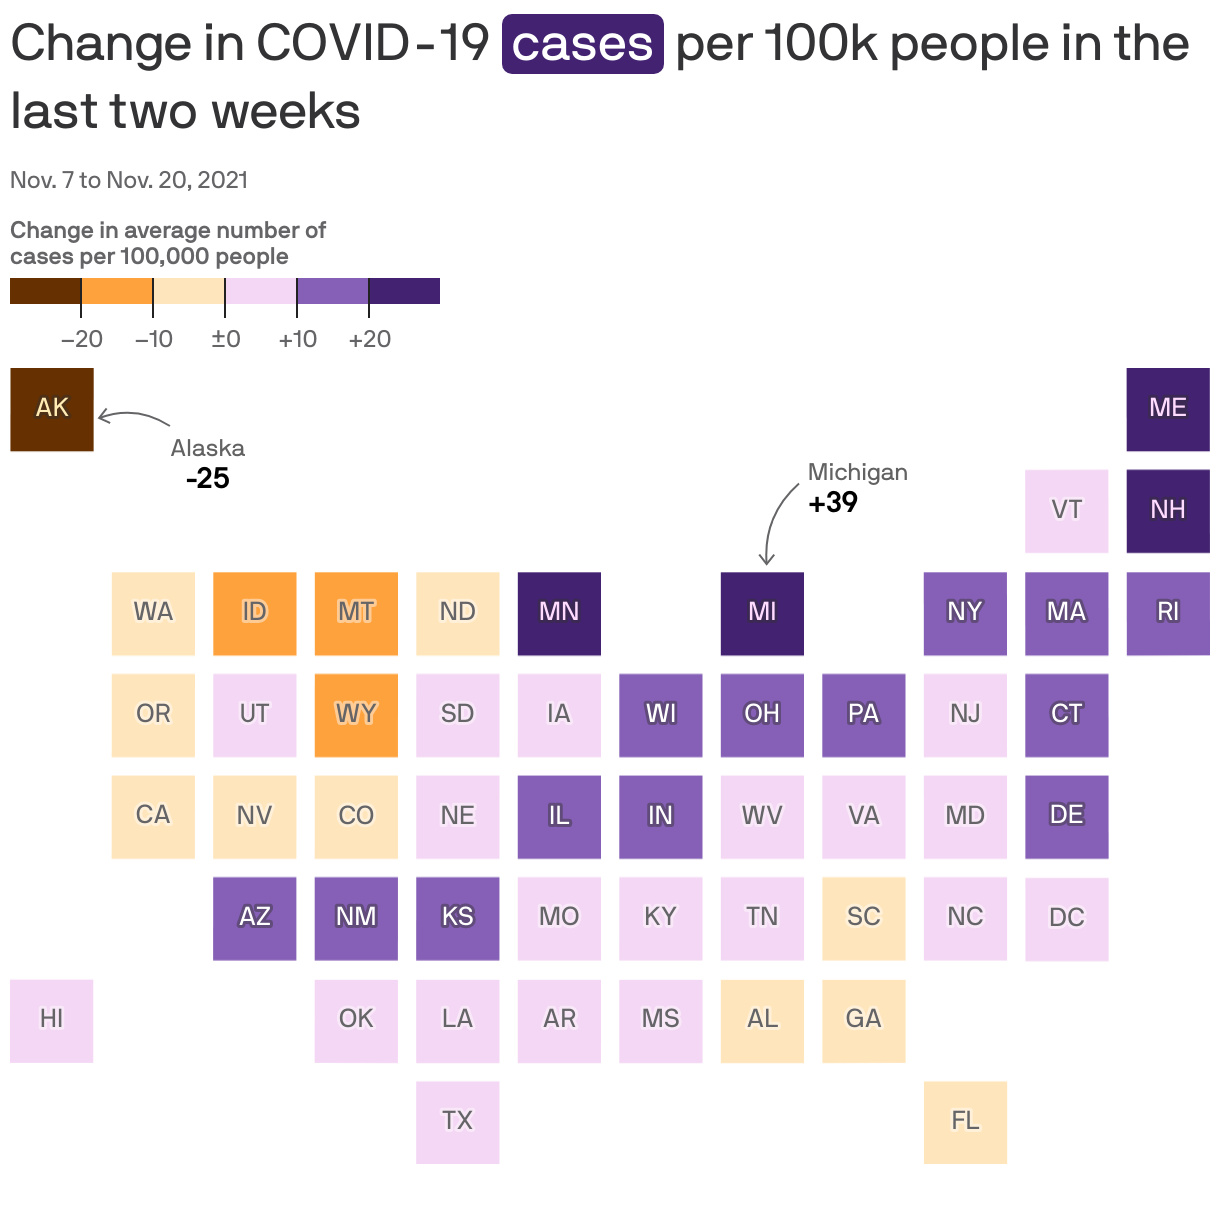 Change in COVID-19 <span style="background:#432371; padding:2px 5px;border-radius:5px;color:white;">cases</span> per 100k people in the last two weeks